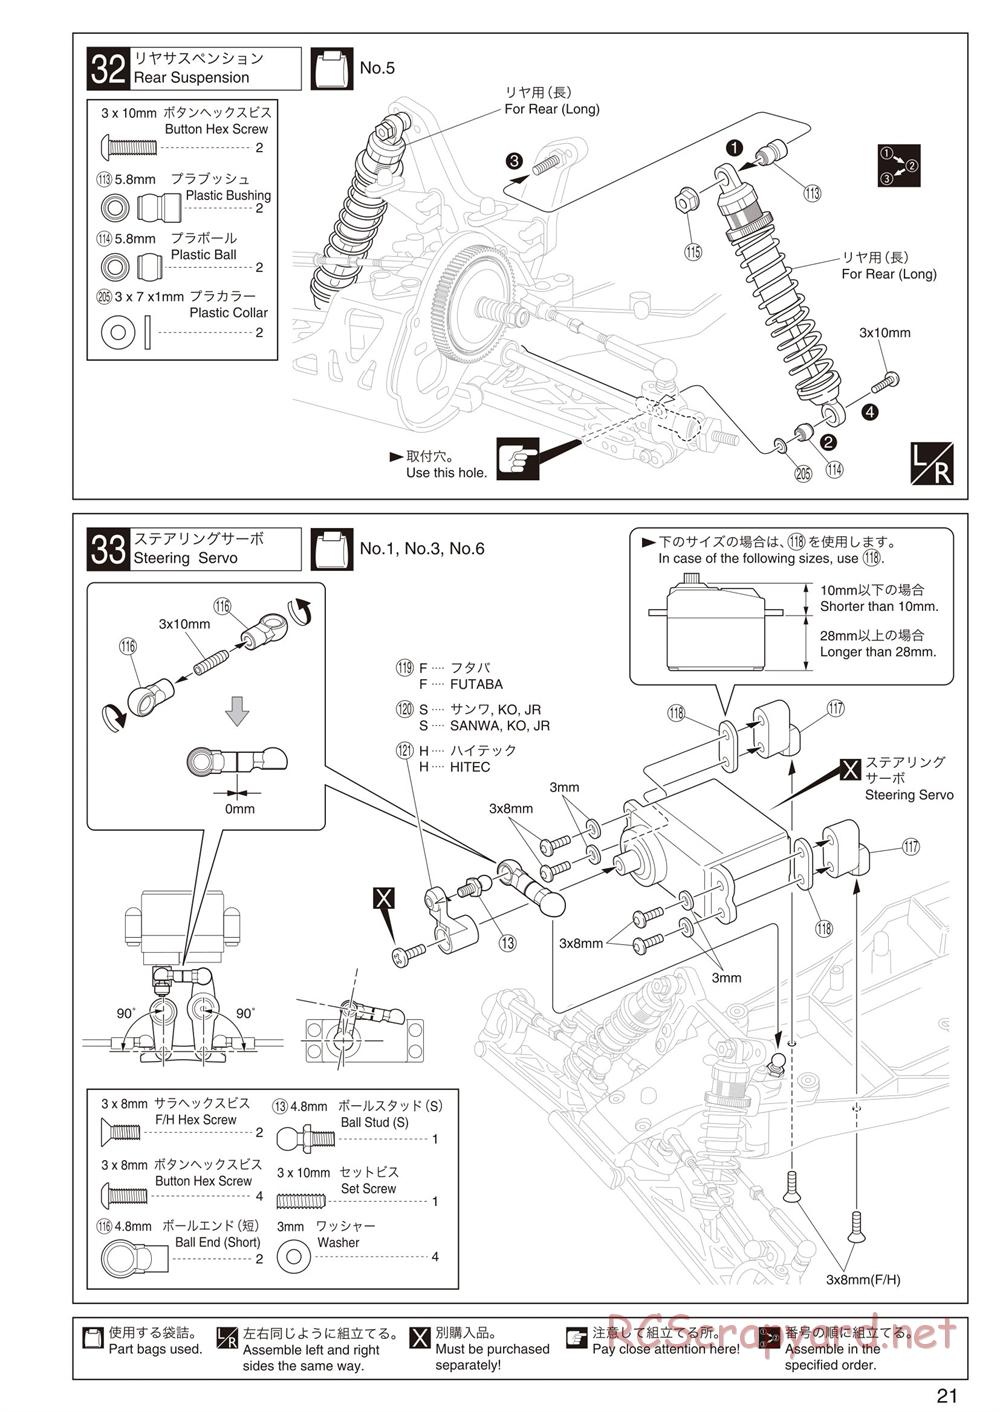 Kyosho - Ultima RB5 SP - Manual - Page 21